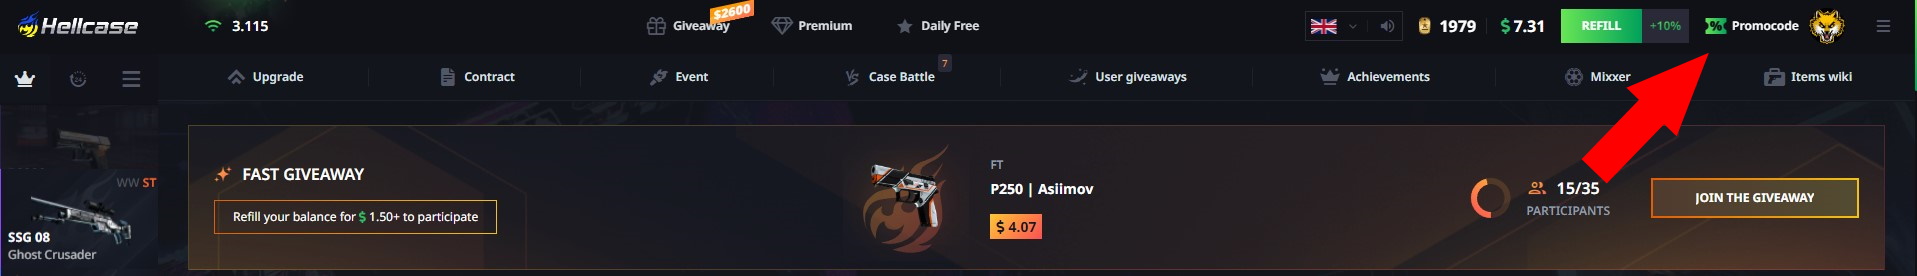 How to use a Hellcase Promo Code